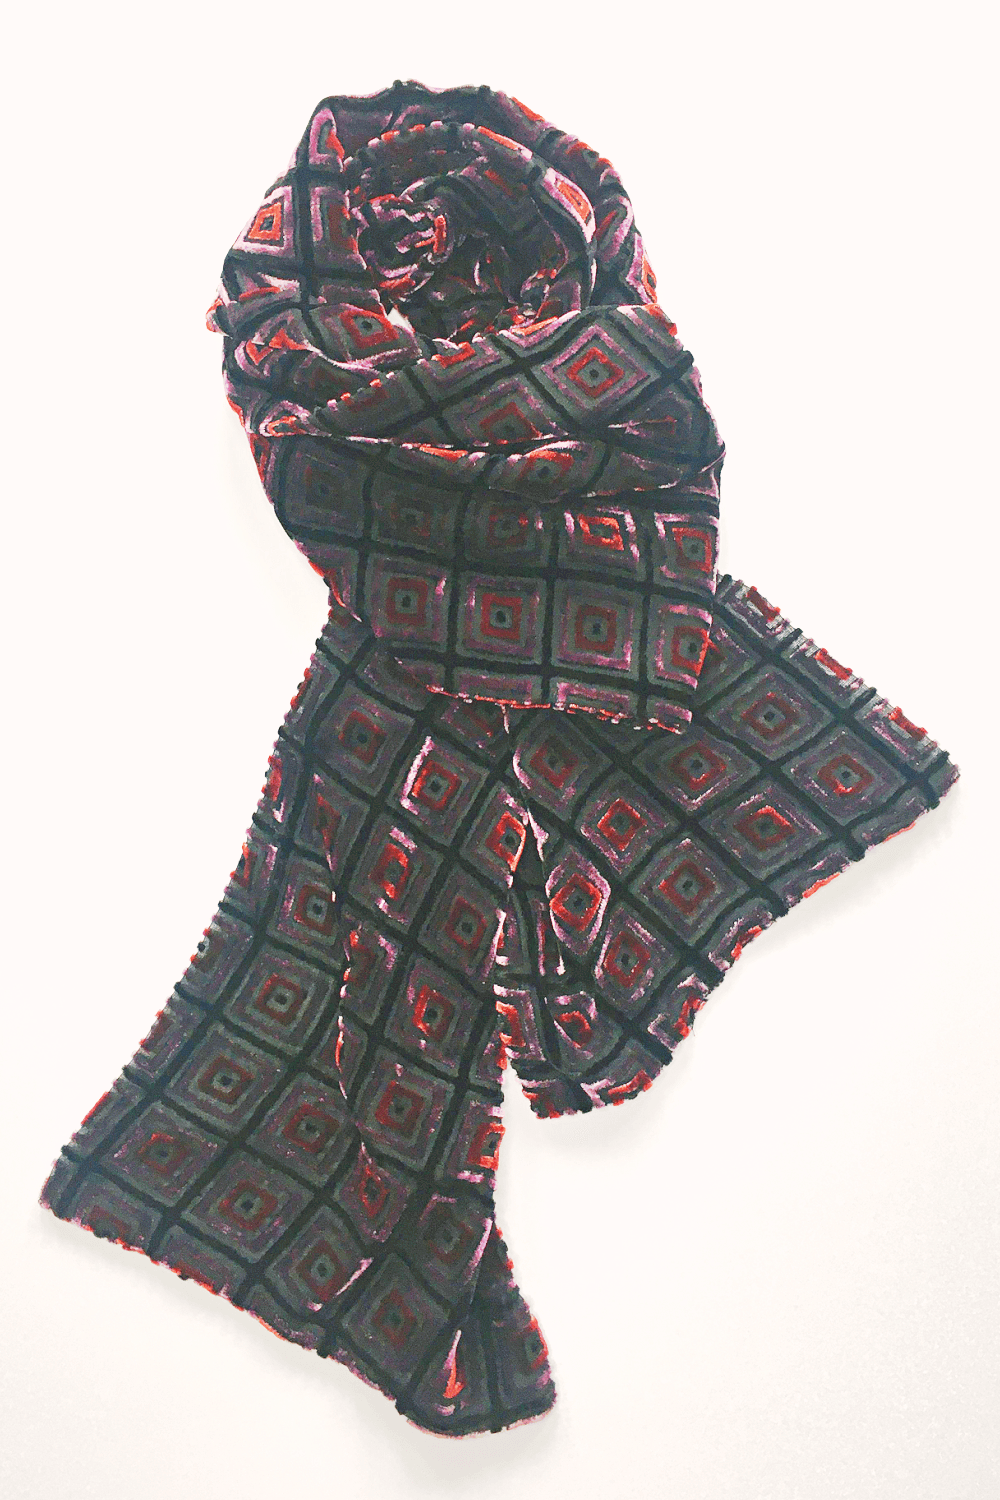 Cut Velvet Scarf in a pink, red and black squares pattern.